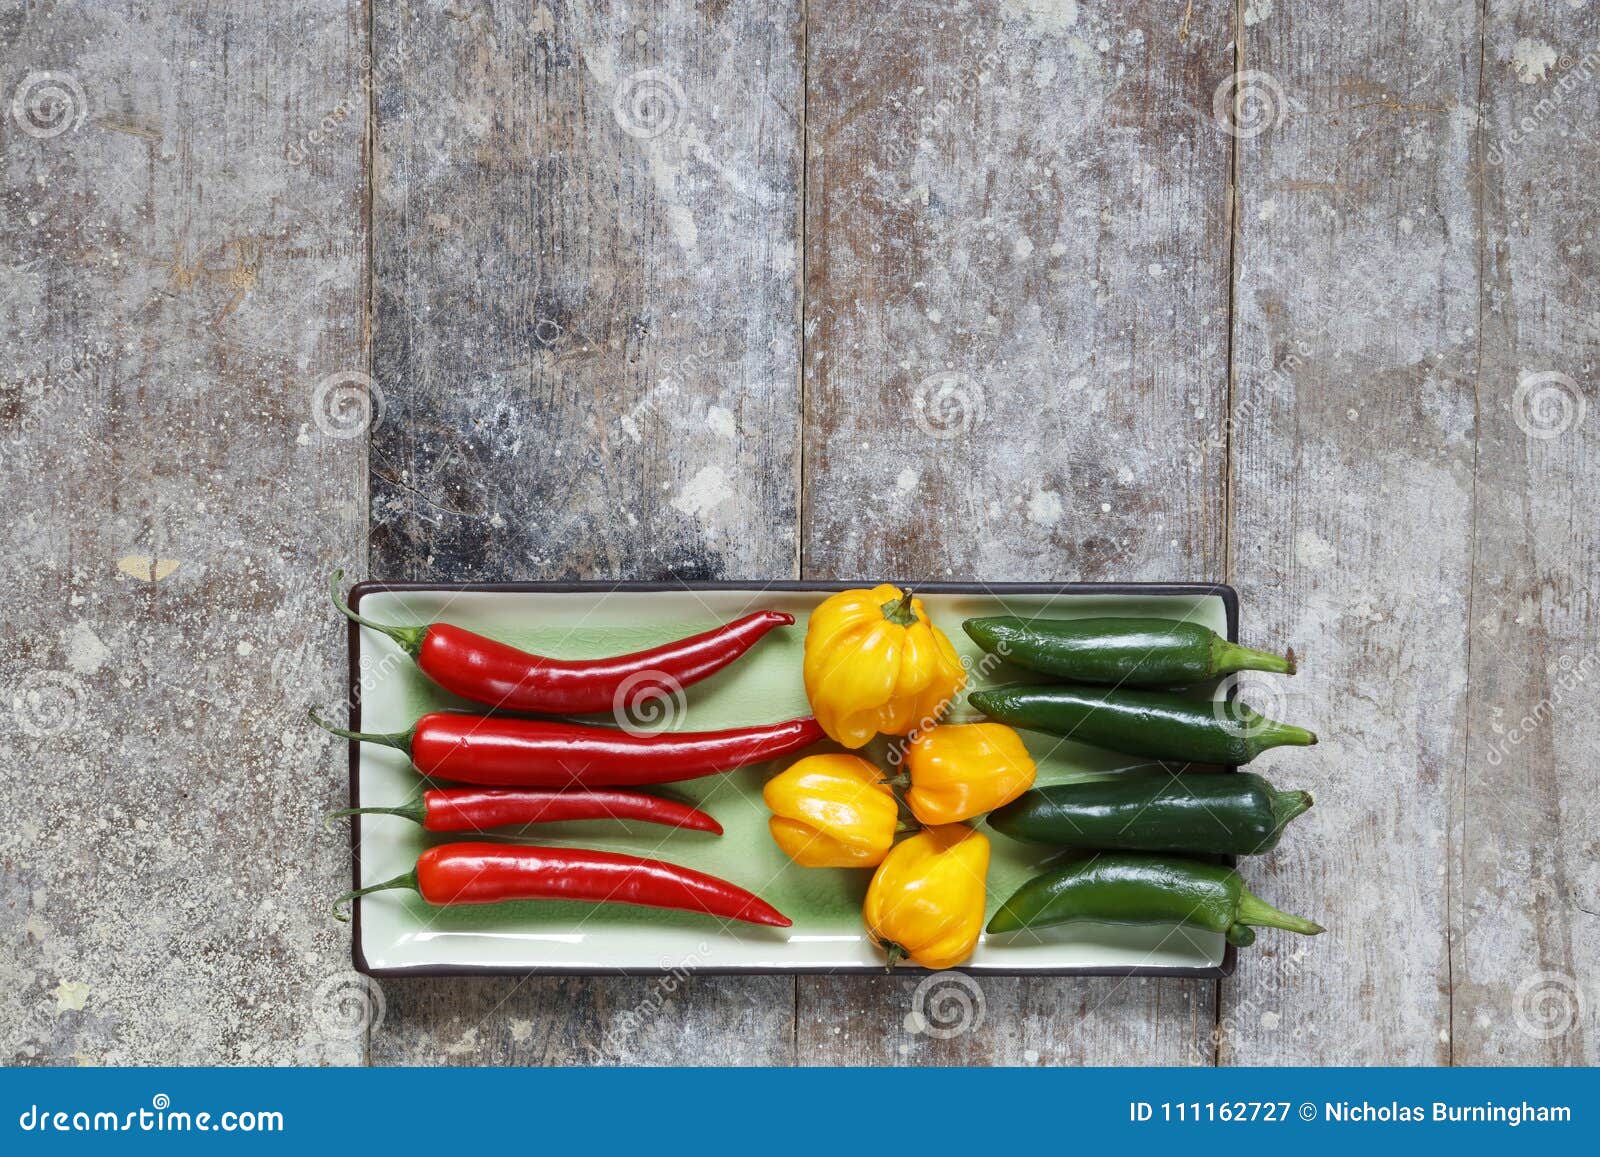 Red Green And Yellow Hot Peppers Arranged On Tray Stock Image Image Of Mexican Jalapeno 111162727